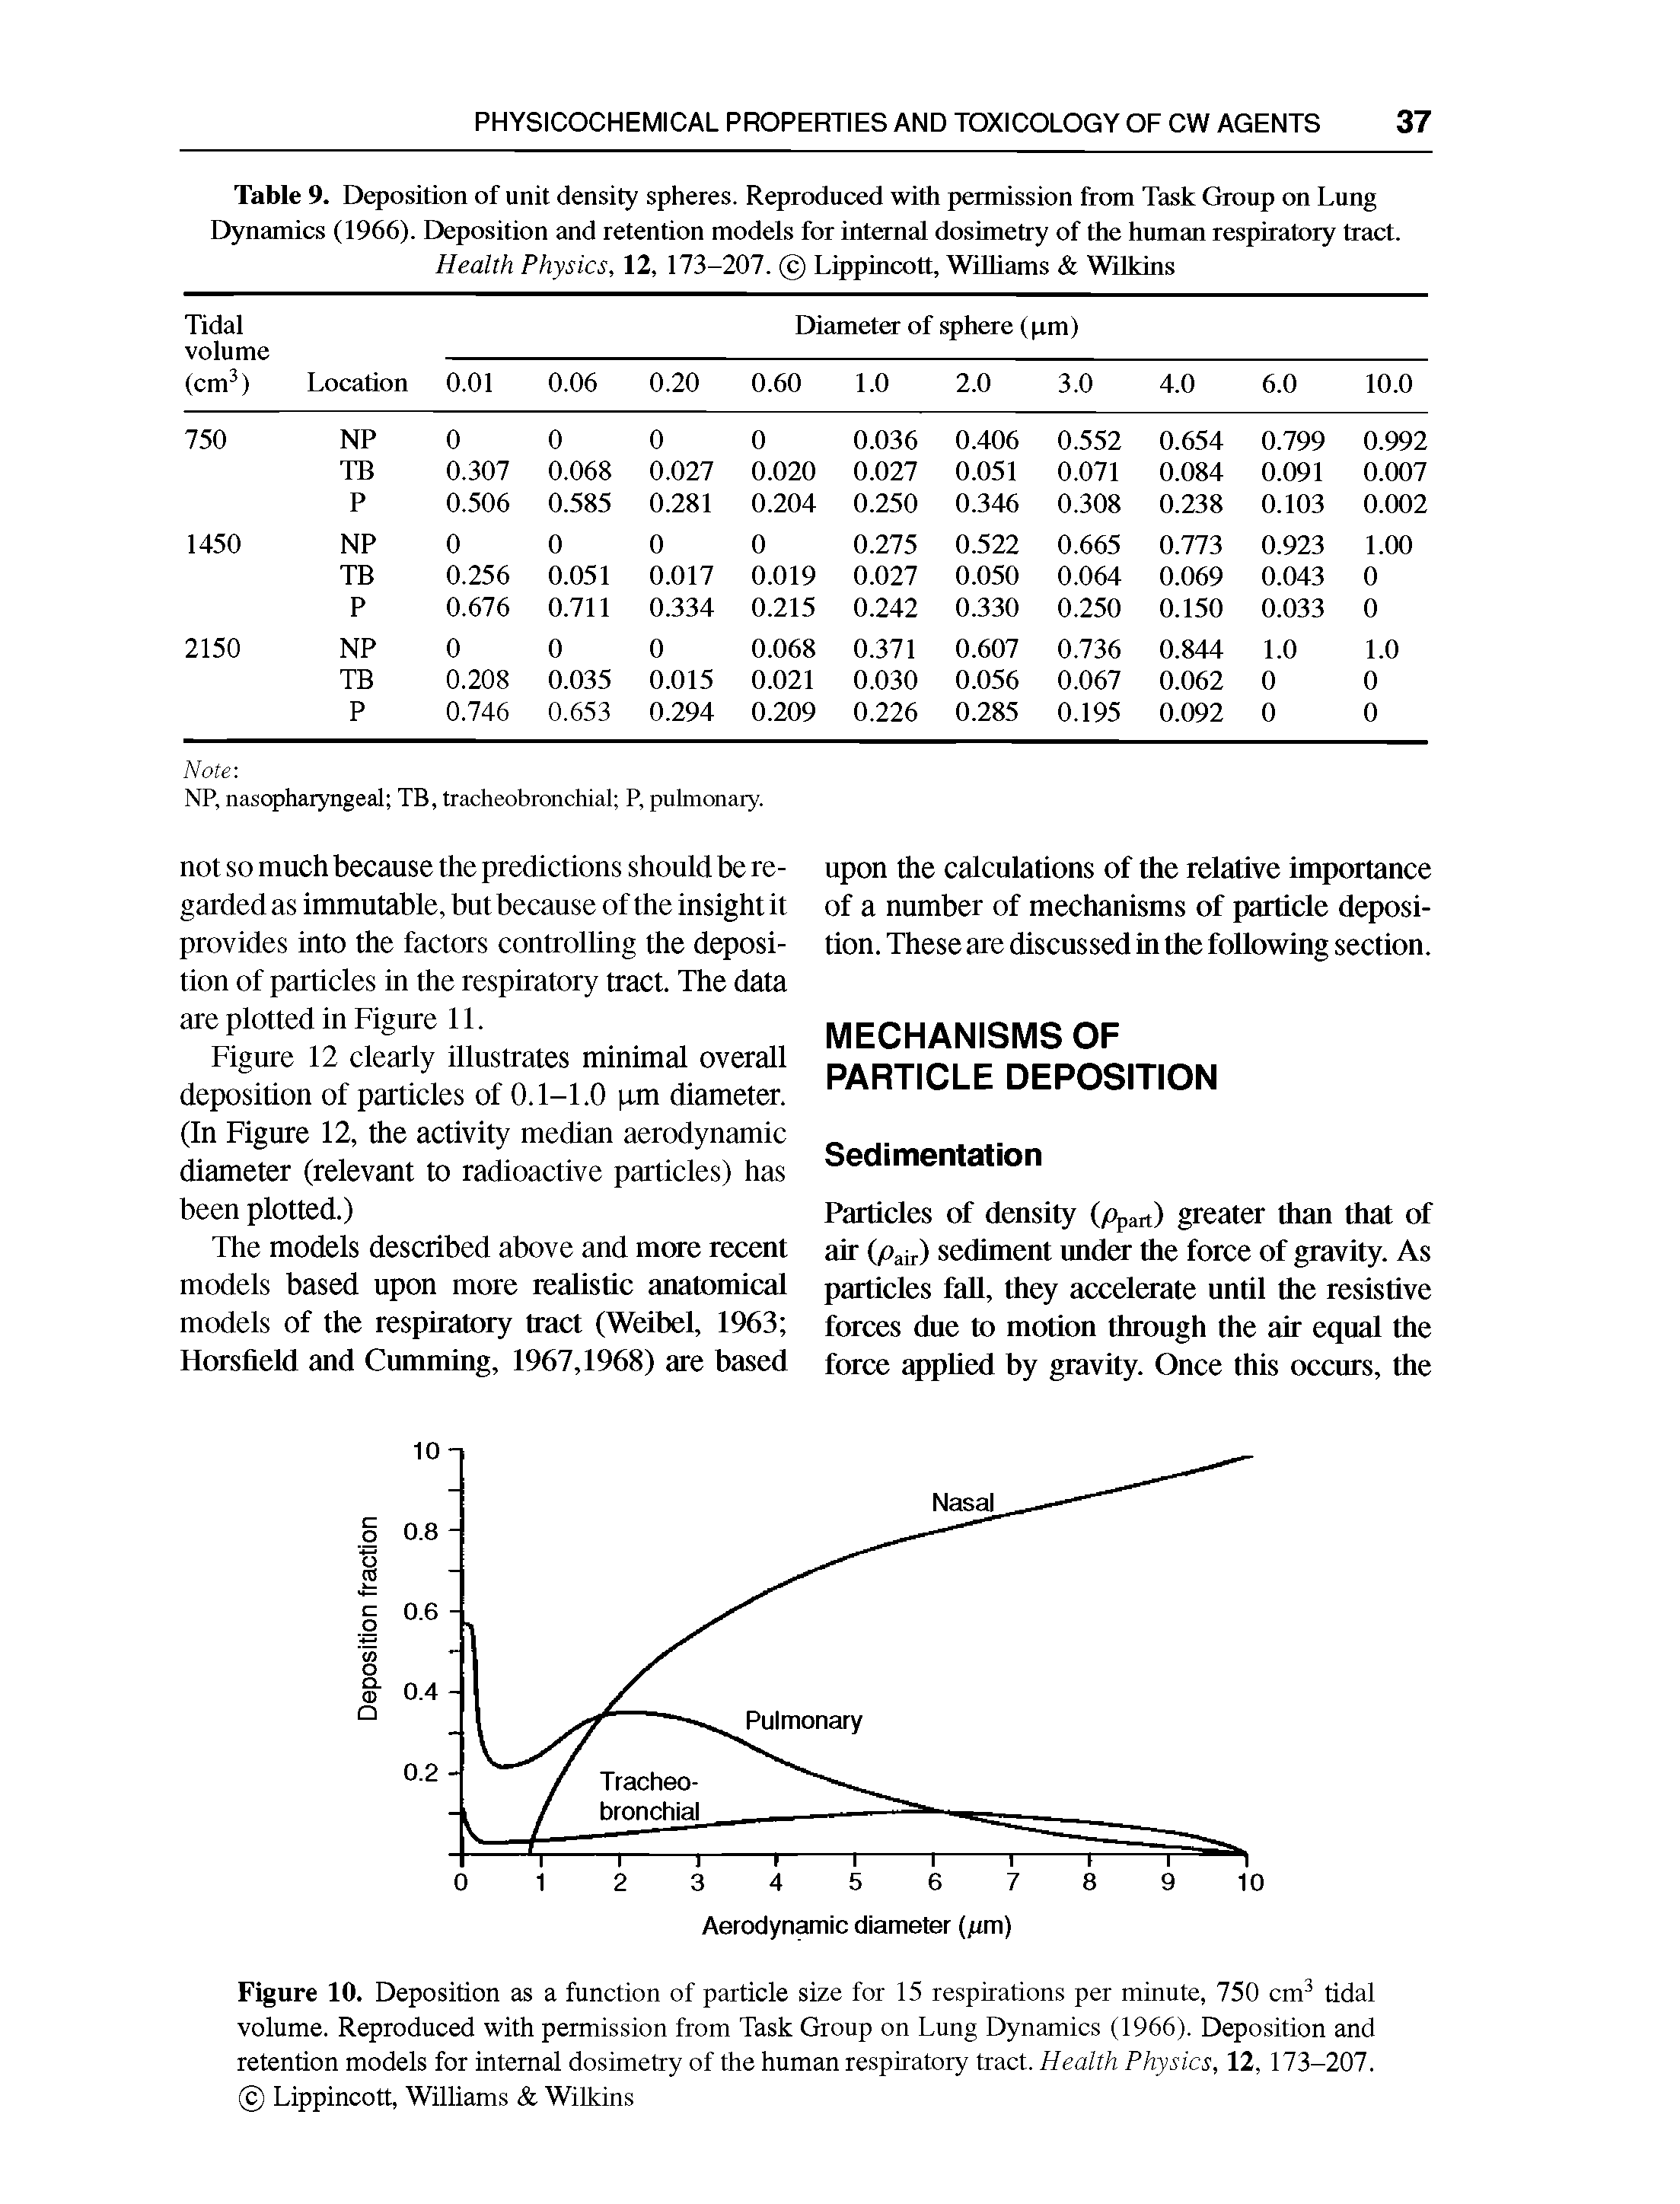 Figure 10. Deposition as a function of particle size for 15 respirations per minute, 750 cm3 tidal volume. Reproduced with permission from Task Group on Lung Dynamics (1966). Deposition and retention models for internal dosimetry of the human respiratory tract. Health Physics, 12, 173-207. Lippincott, Williams Wilkins...